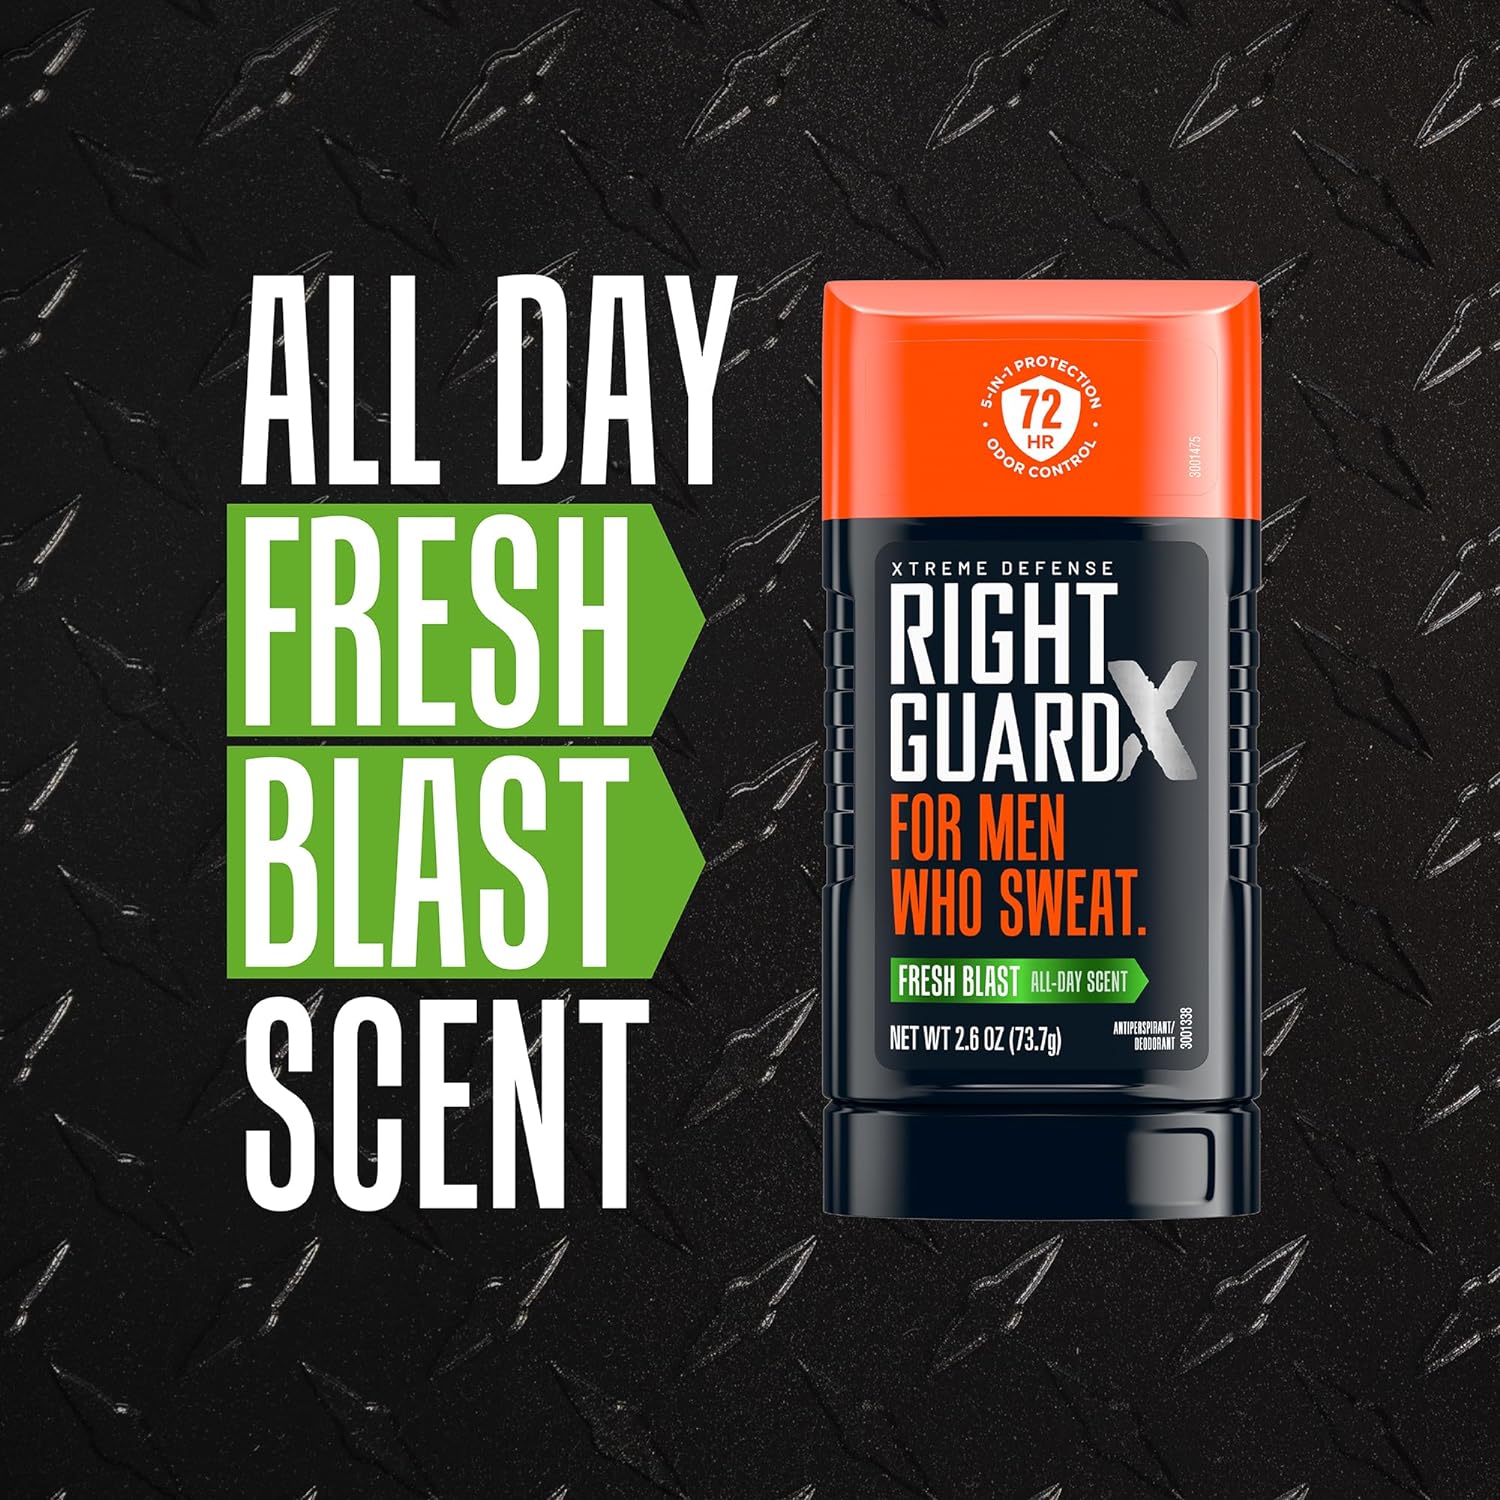 Right Guard Xtreme Defense Invisible Solid Antiperspirant & Deodorant ,72-Hour Odor Control,Fresh Blast Scent, 2.6 oz. (4 count) : Beauty & Personal Care